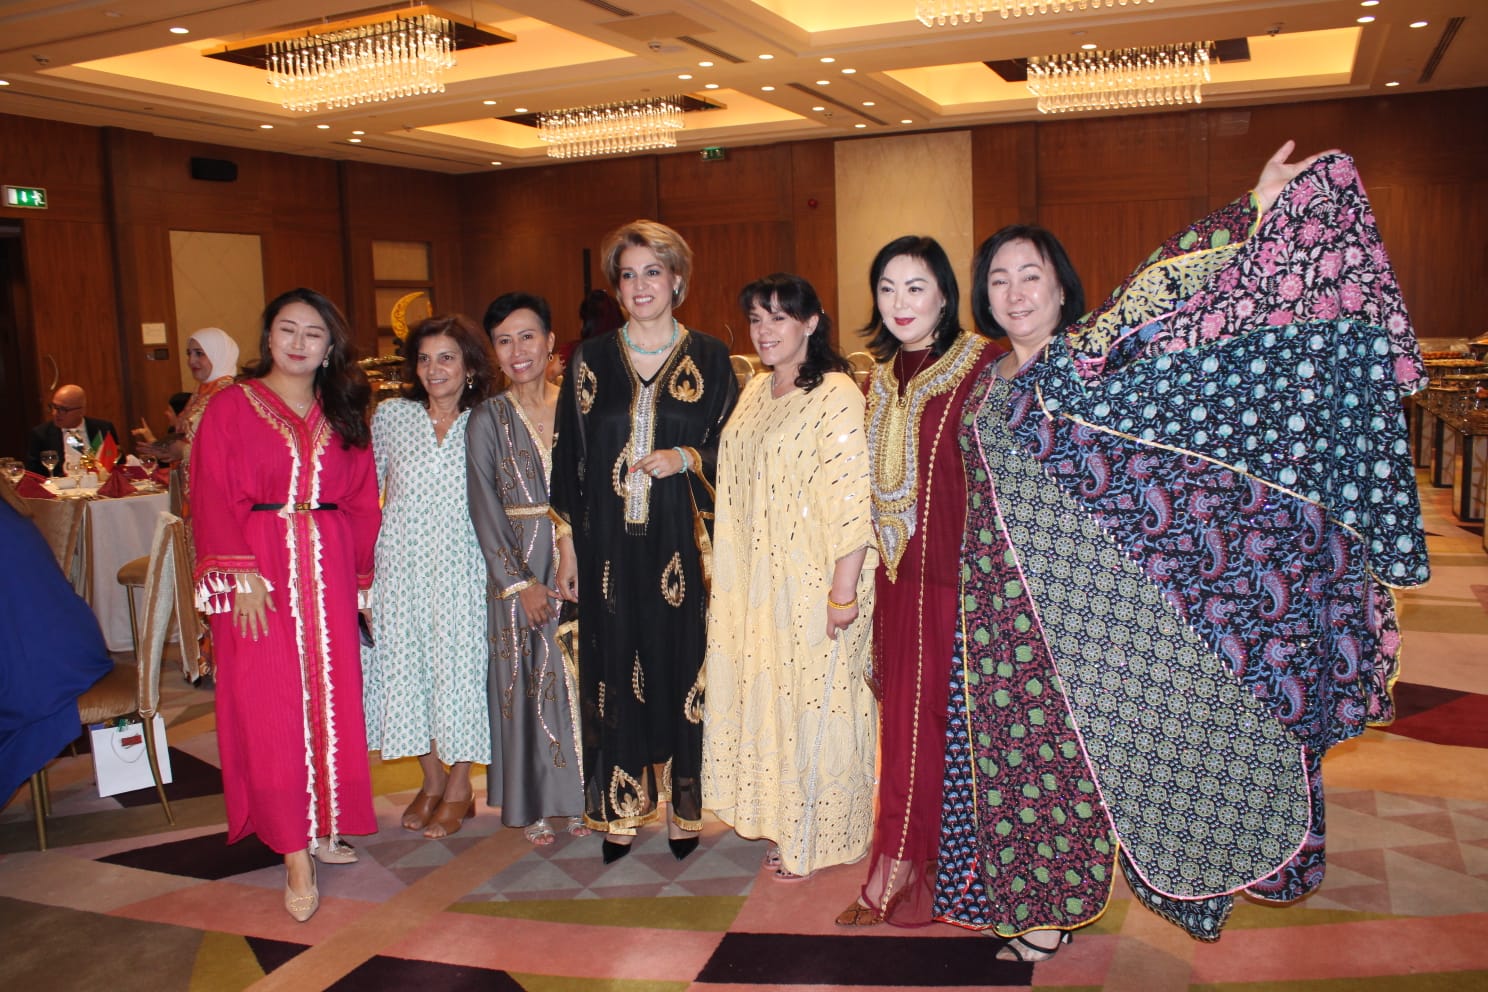 IWG event highlights Moroccan investment opportunities, culture